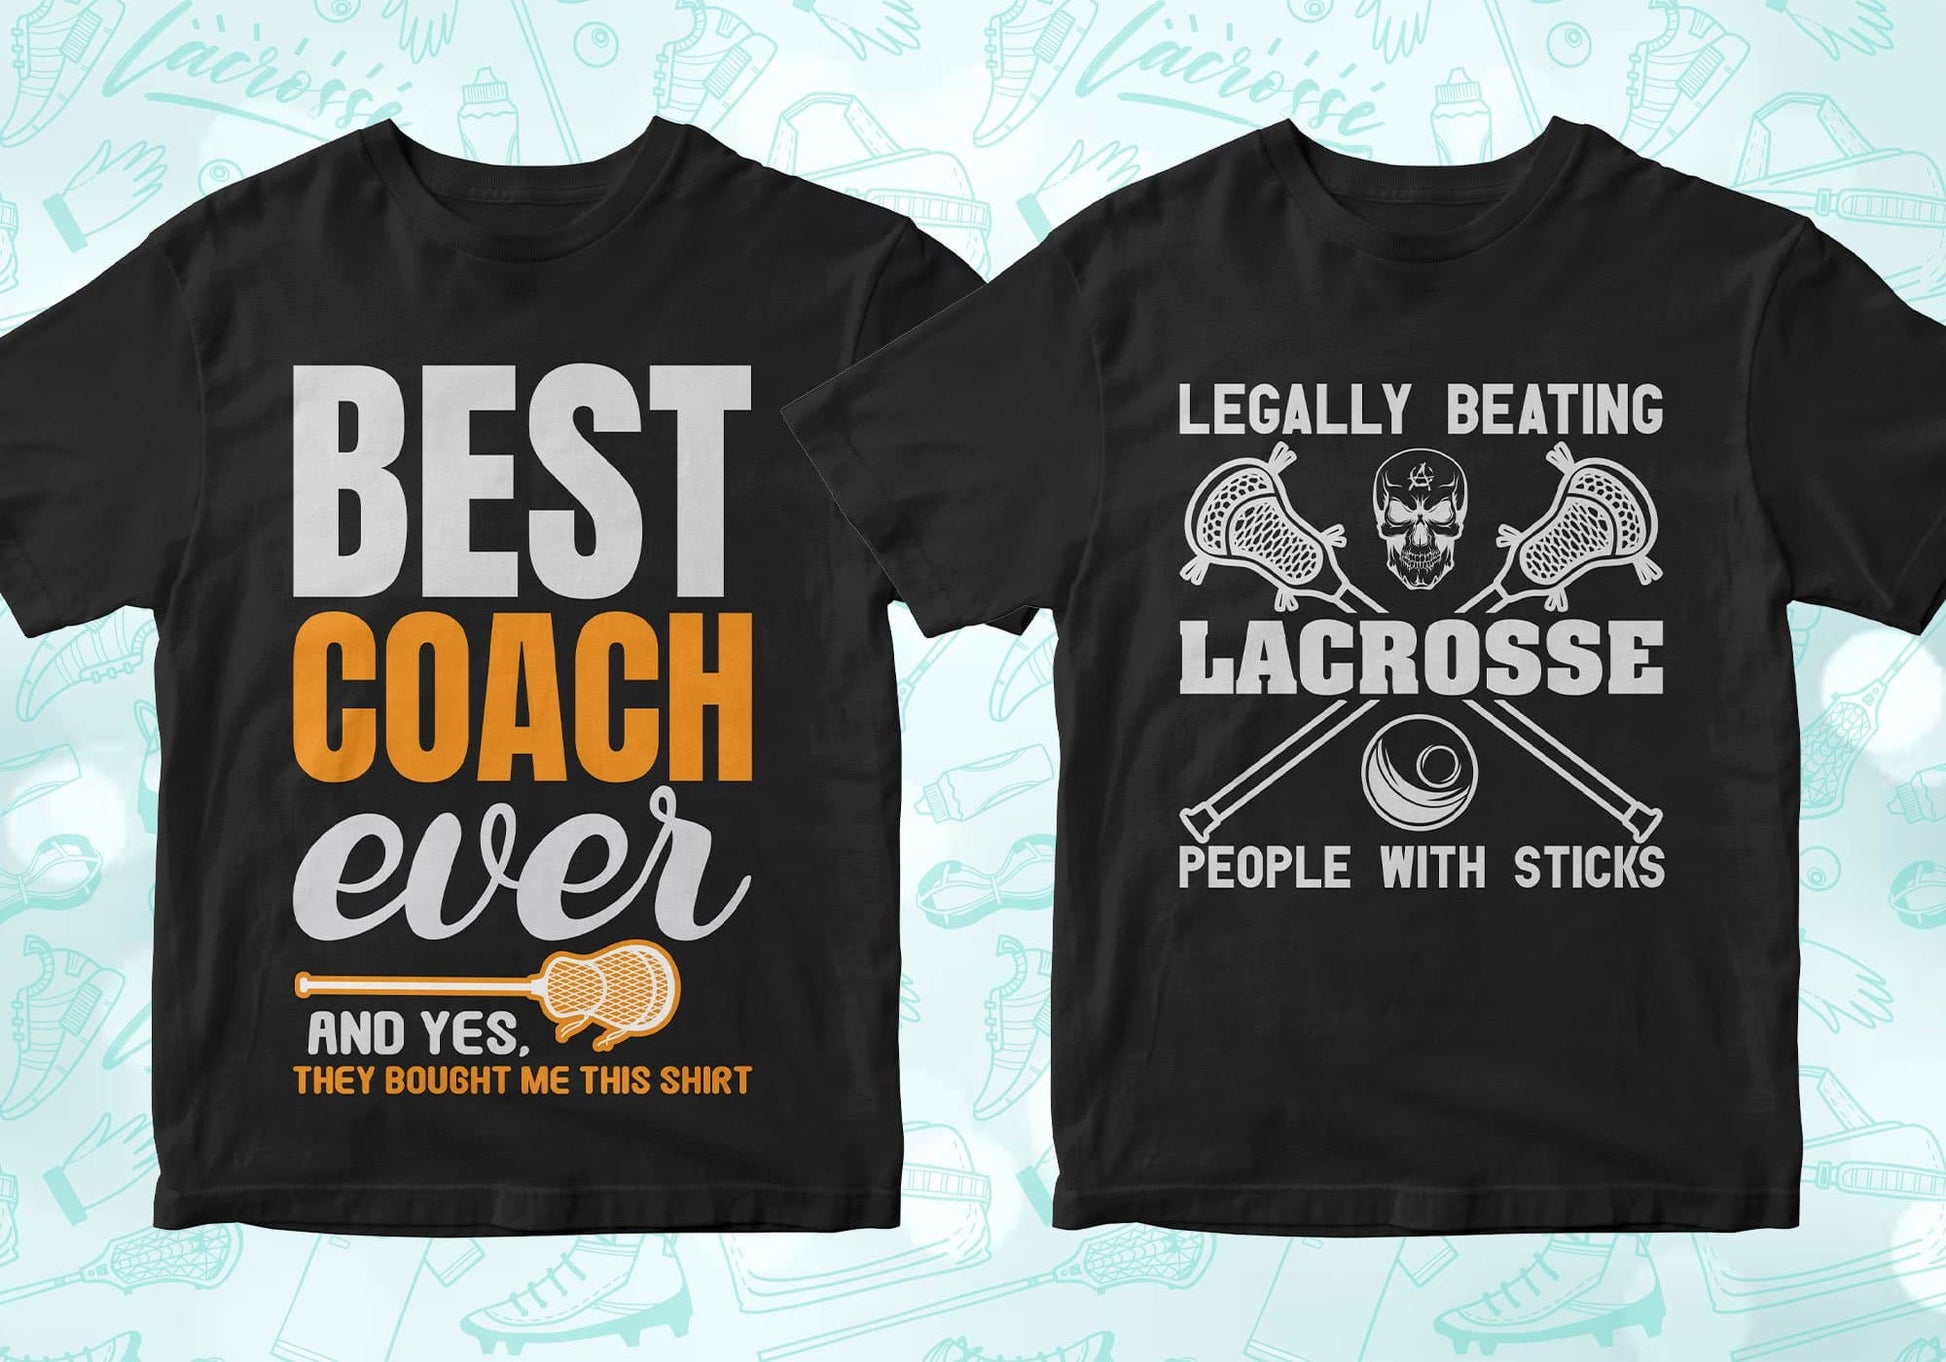 best coach ever and yes they bought me this shirt, legally beating lacrosse people with sticks, lacrosse shirts lacrosse tshirt lacrosse t shirts lacrosse shirt designs lacrosse graphic